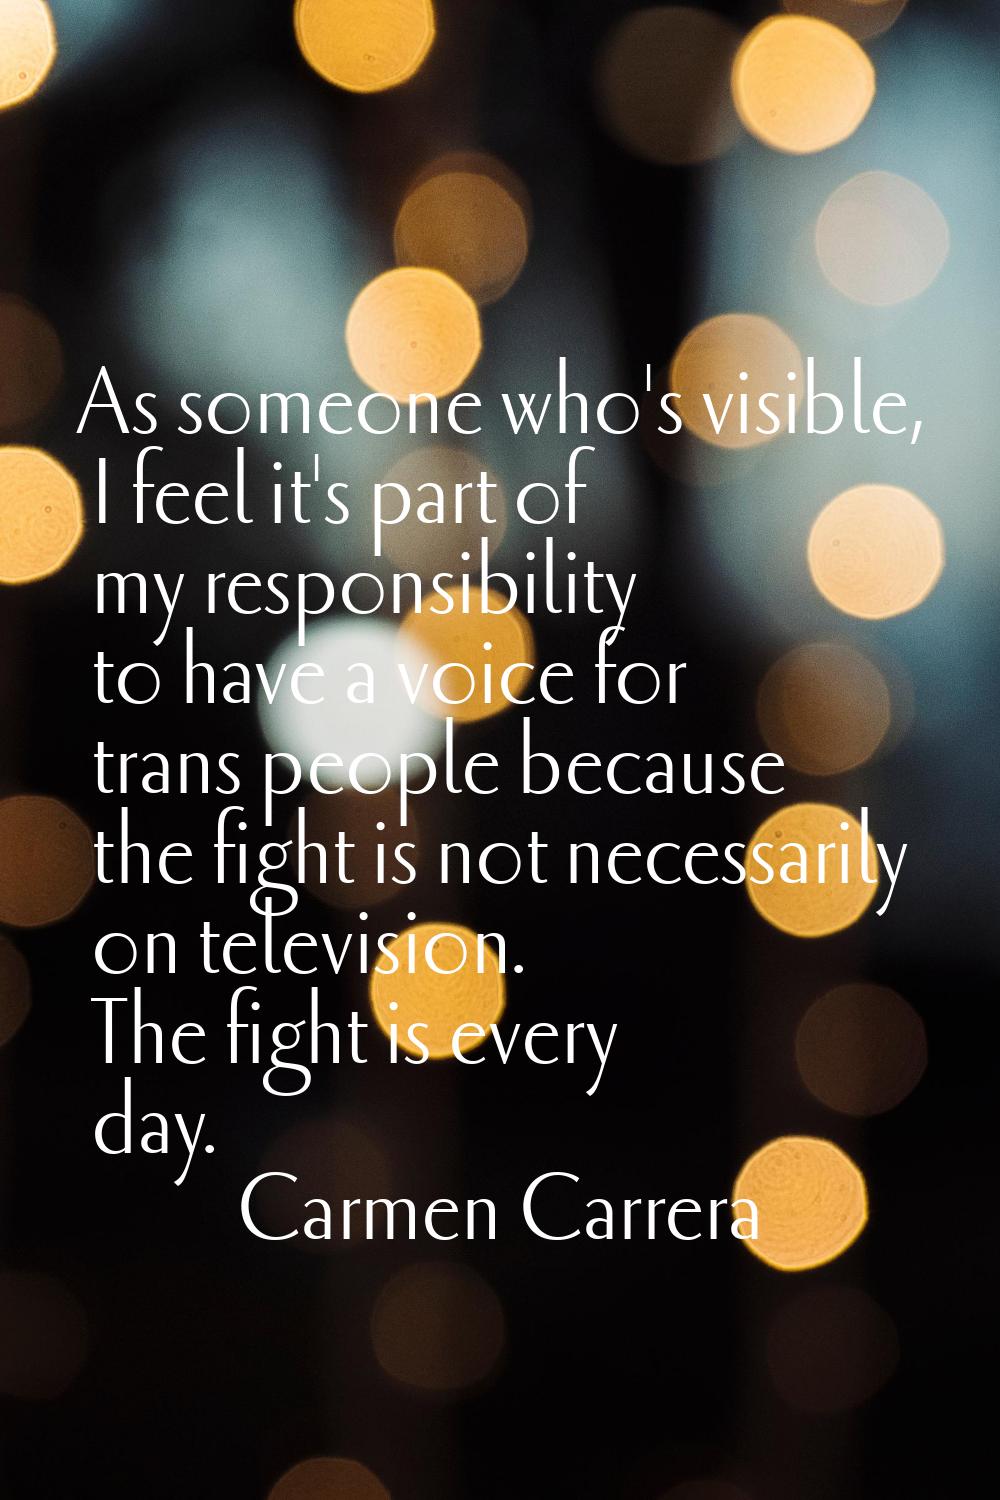 As someone who's visible, I feel it's part of my responsibility to have a voice for trans people be